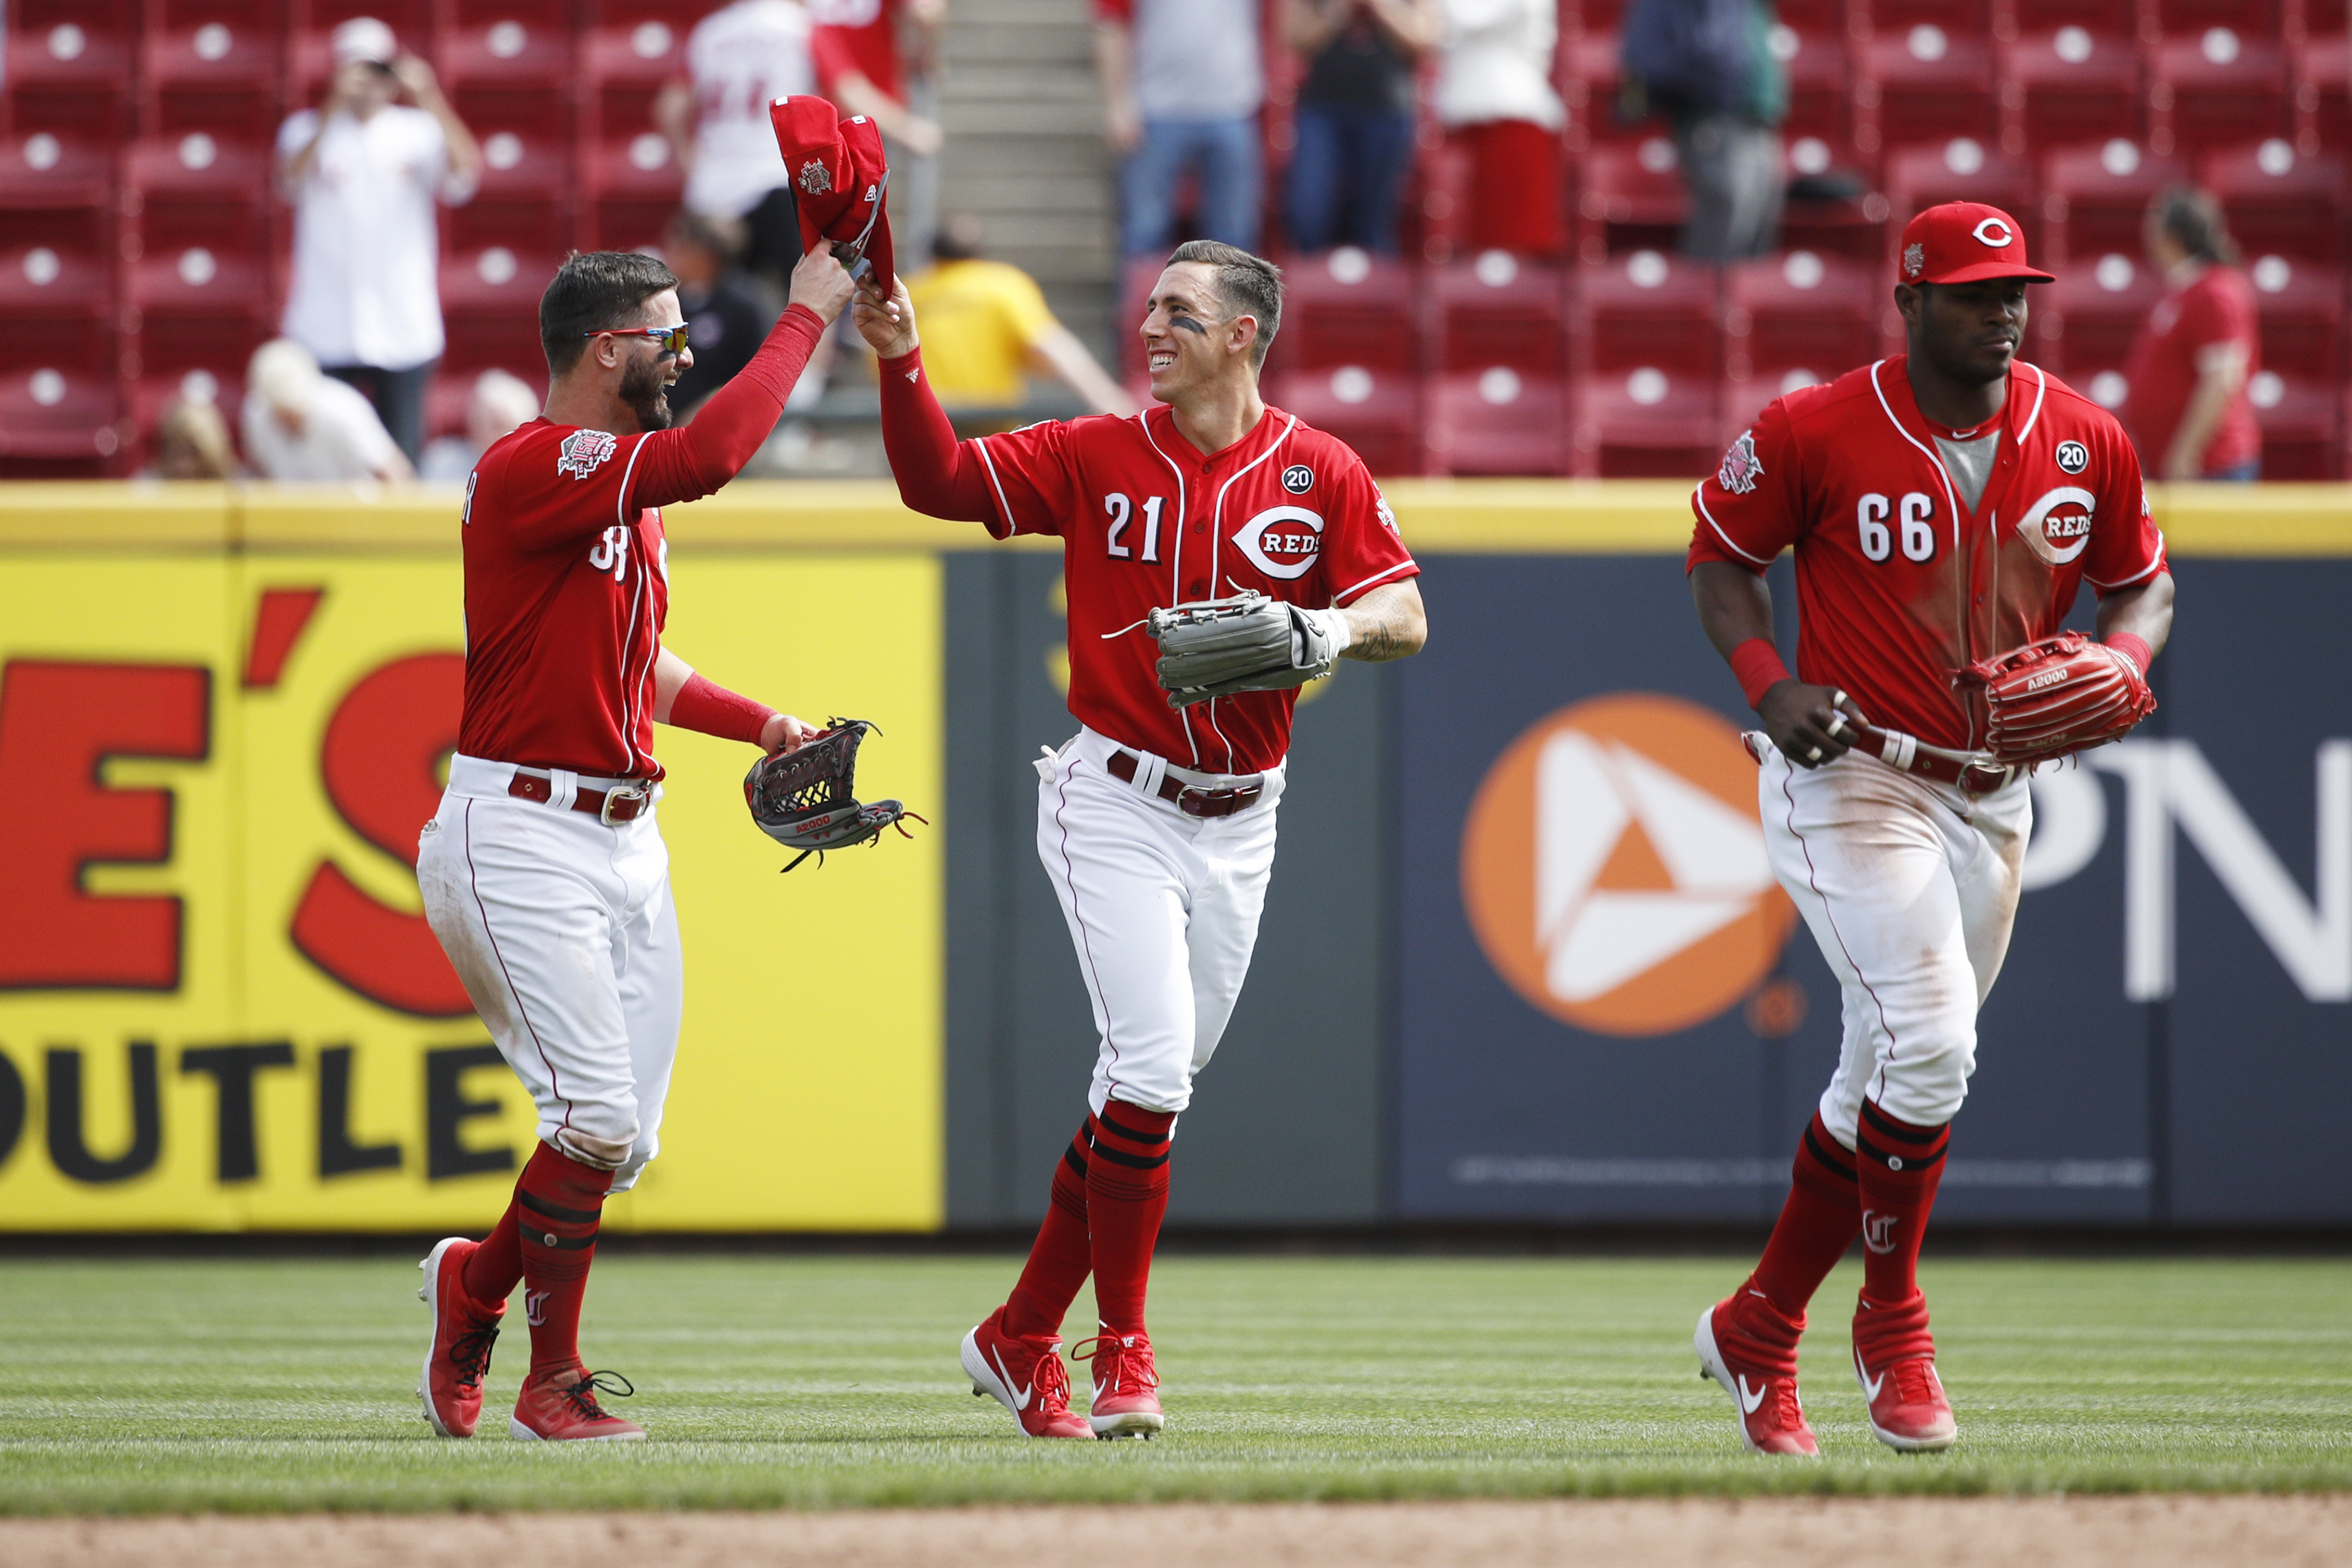 Cincinnati Reds to host two-game series vs. Cardinals in Mexico